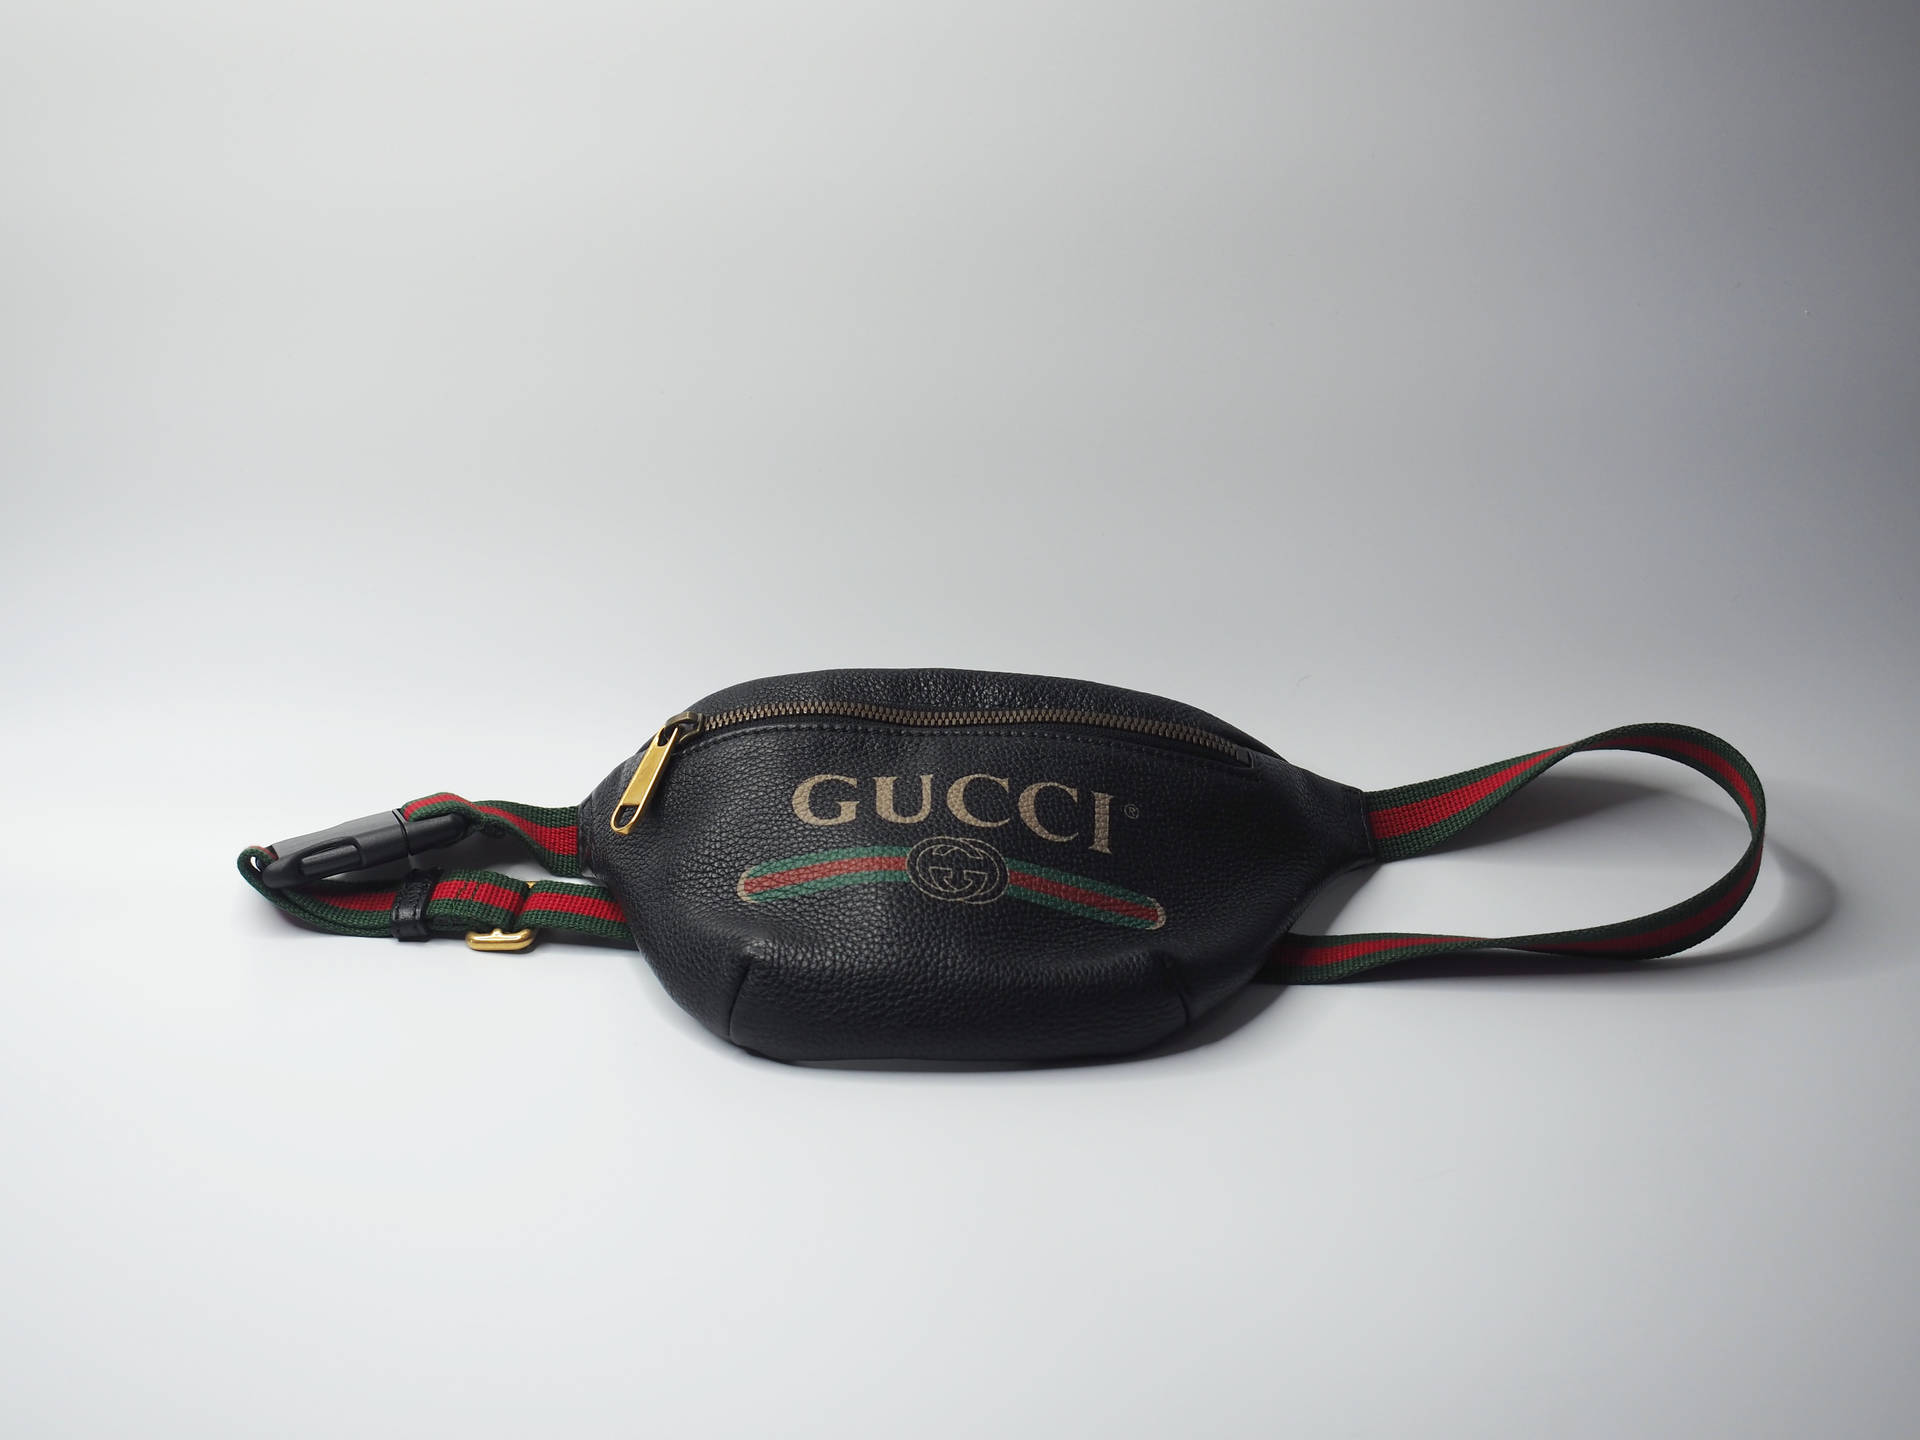 4608X3456 Gucci Wallpaper and Background